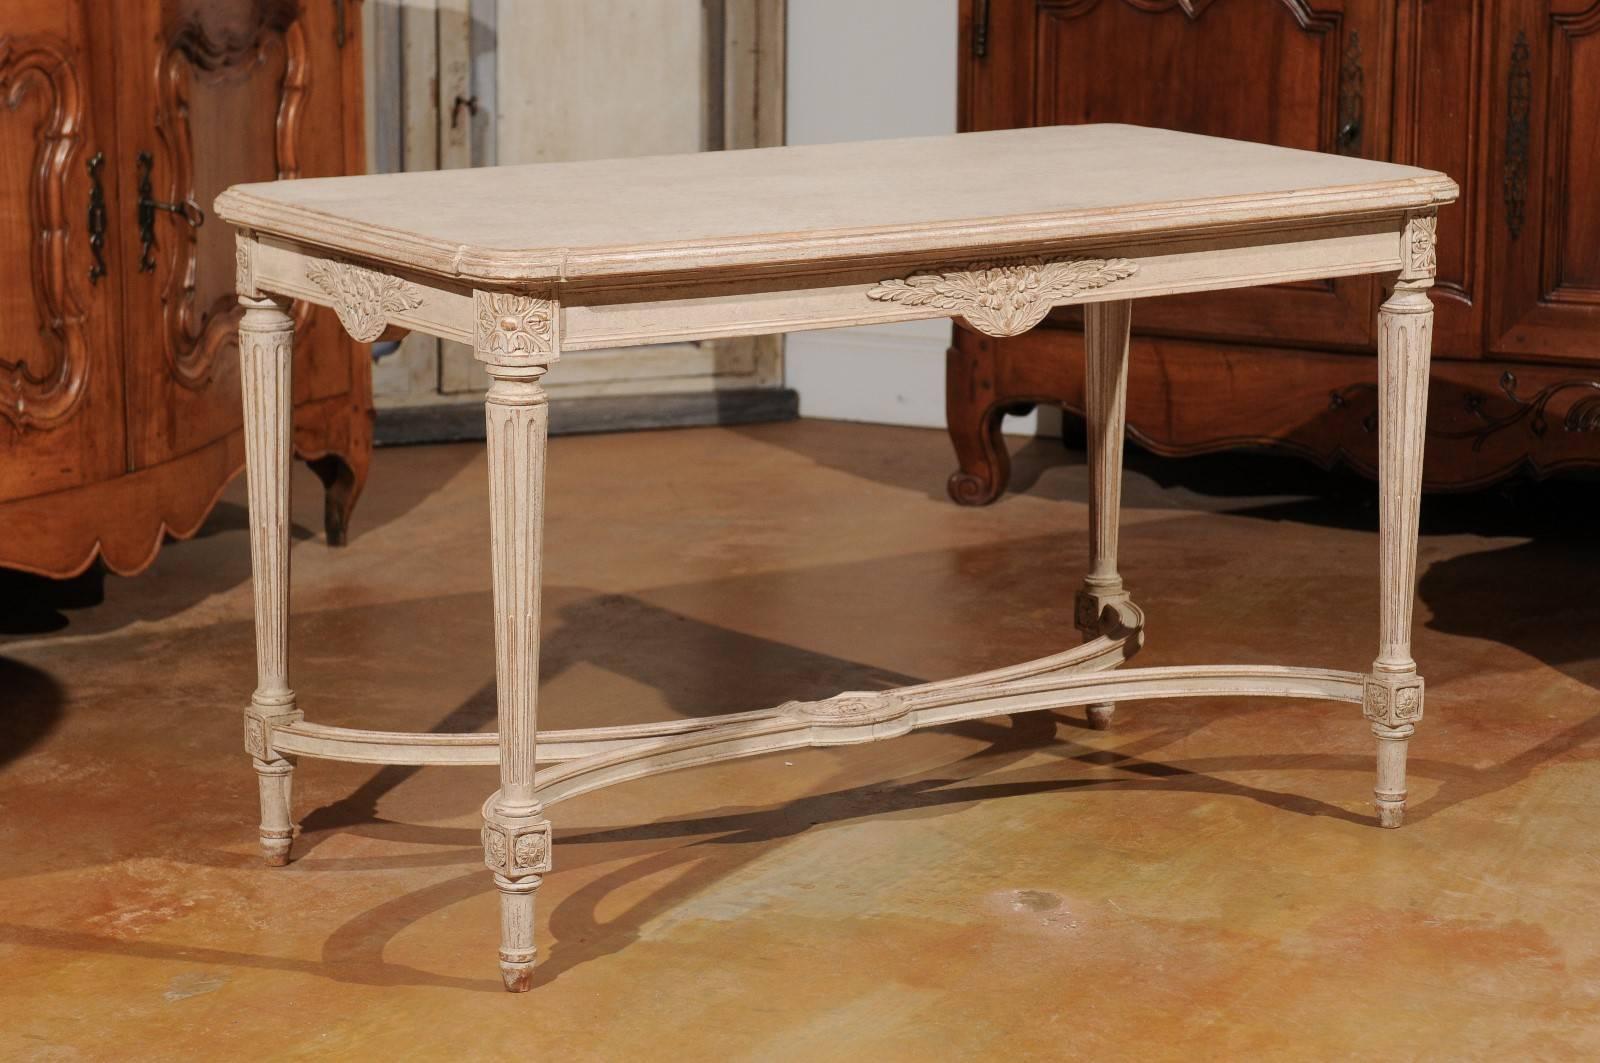 A Swedish Gustavian style painted wood coffee table with fluted legs and cross stretcher from the early 20th century. This Swedish coffee table features a rectangular top with beveled edges and rounded corners, sitting above an exquisitely carved